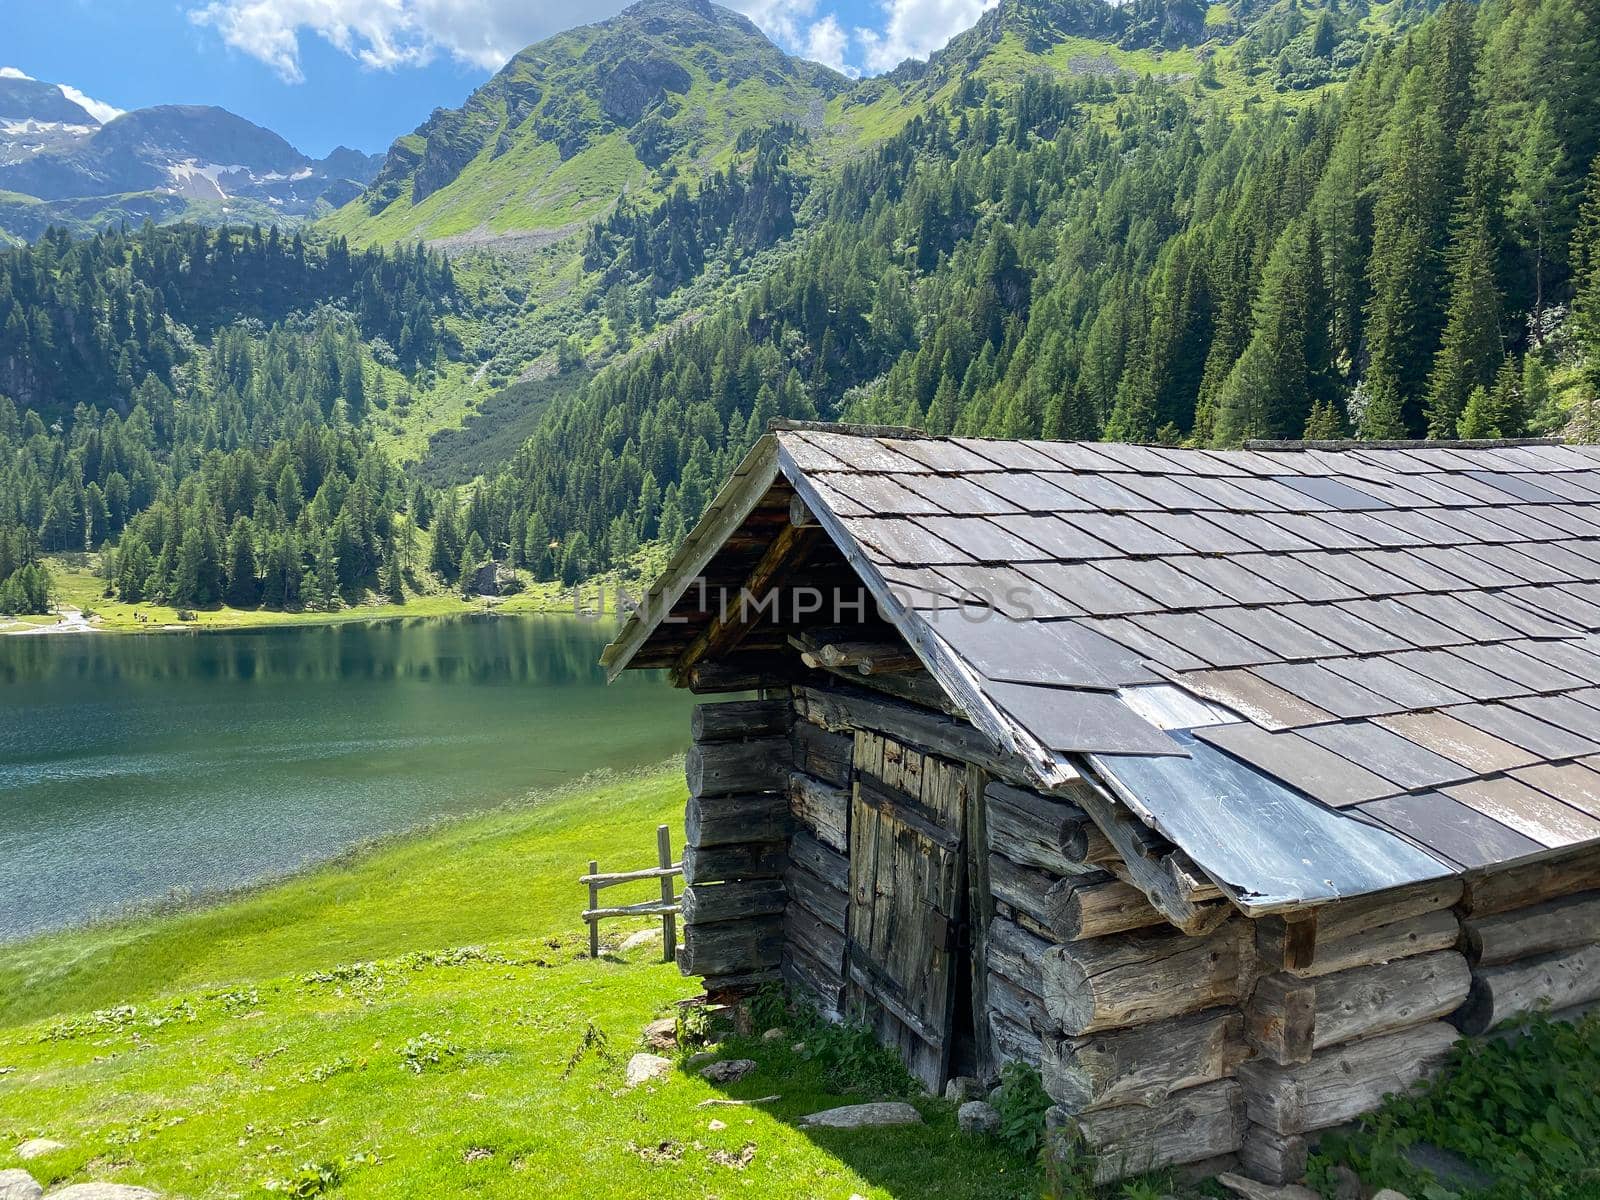 Very old barn, Duisitzkarsee Lake in Austria.The Duisitzkarsee is probably one of the most beautiful mountain lakes in the Schladminger Tauern.The place without  tourists after the coronavirus pandemic.